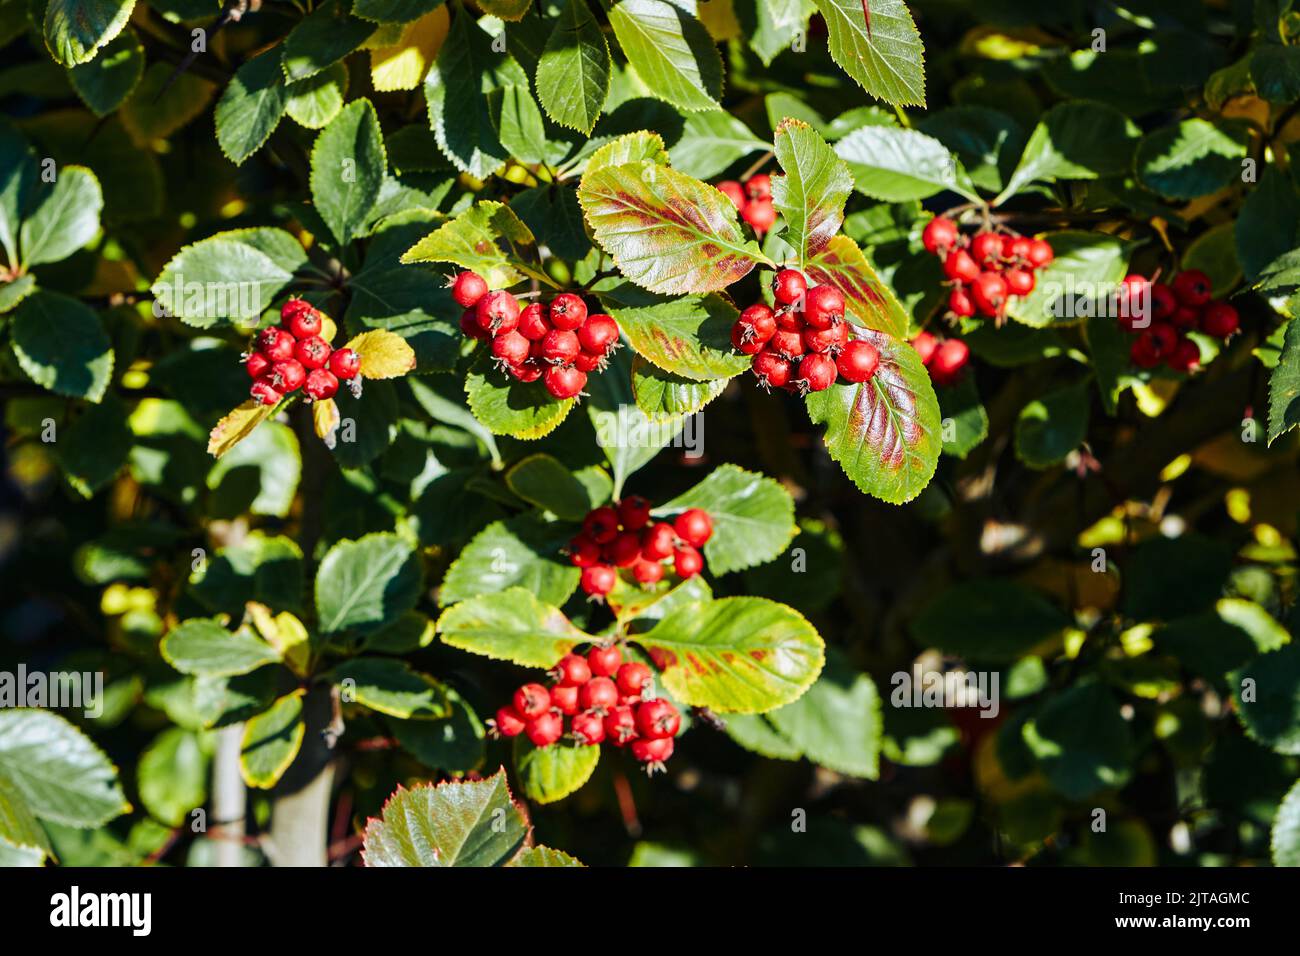 Autumn hawthorn berries on green branches Stock Photo